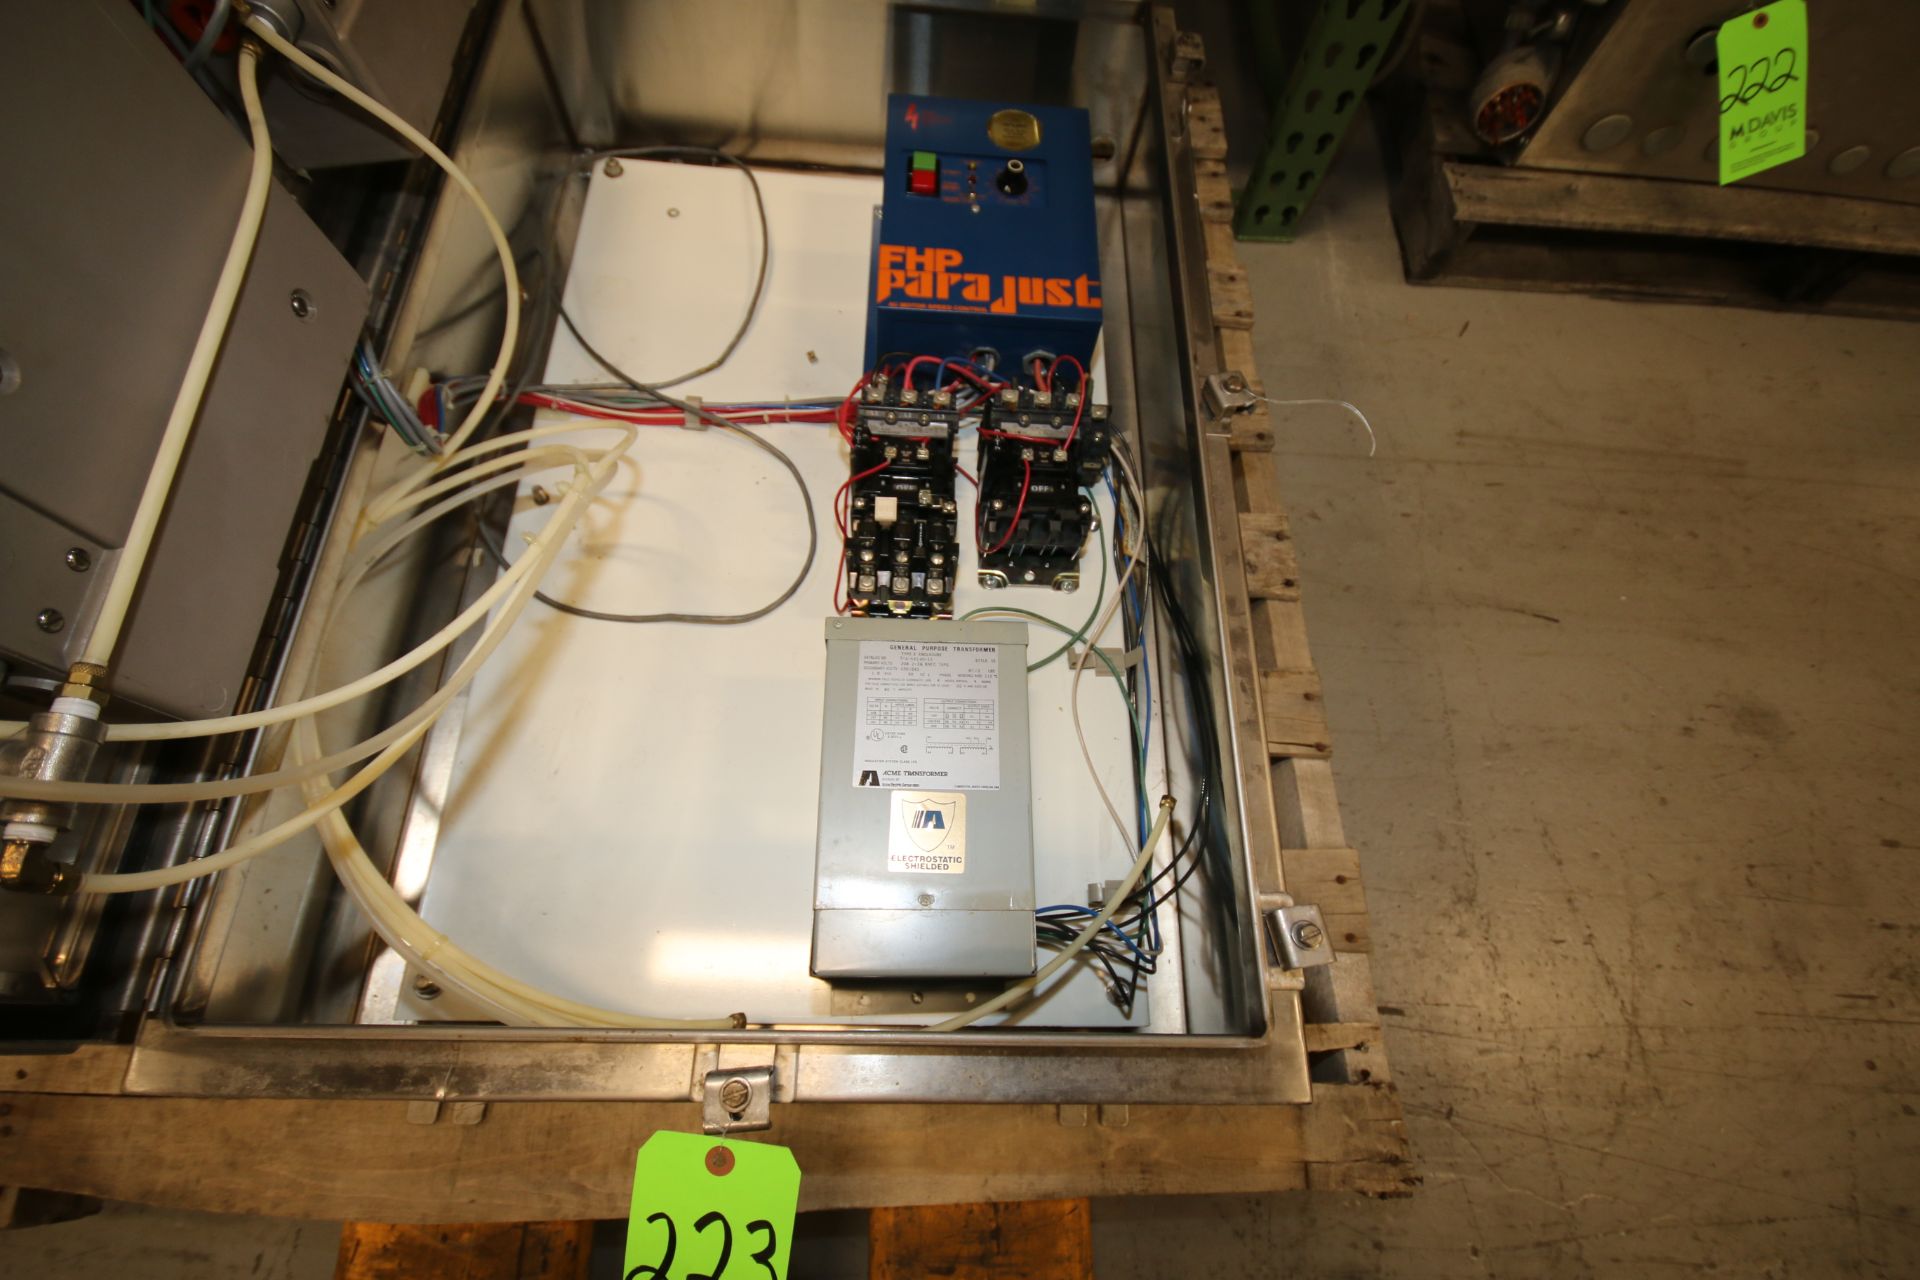 (2) Allen Bradley Starters - Size 0 and Size 1, GE 1.0 KVA Transformer, FHP Parajust AC Motor - Image 2 of 3